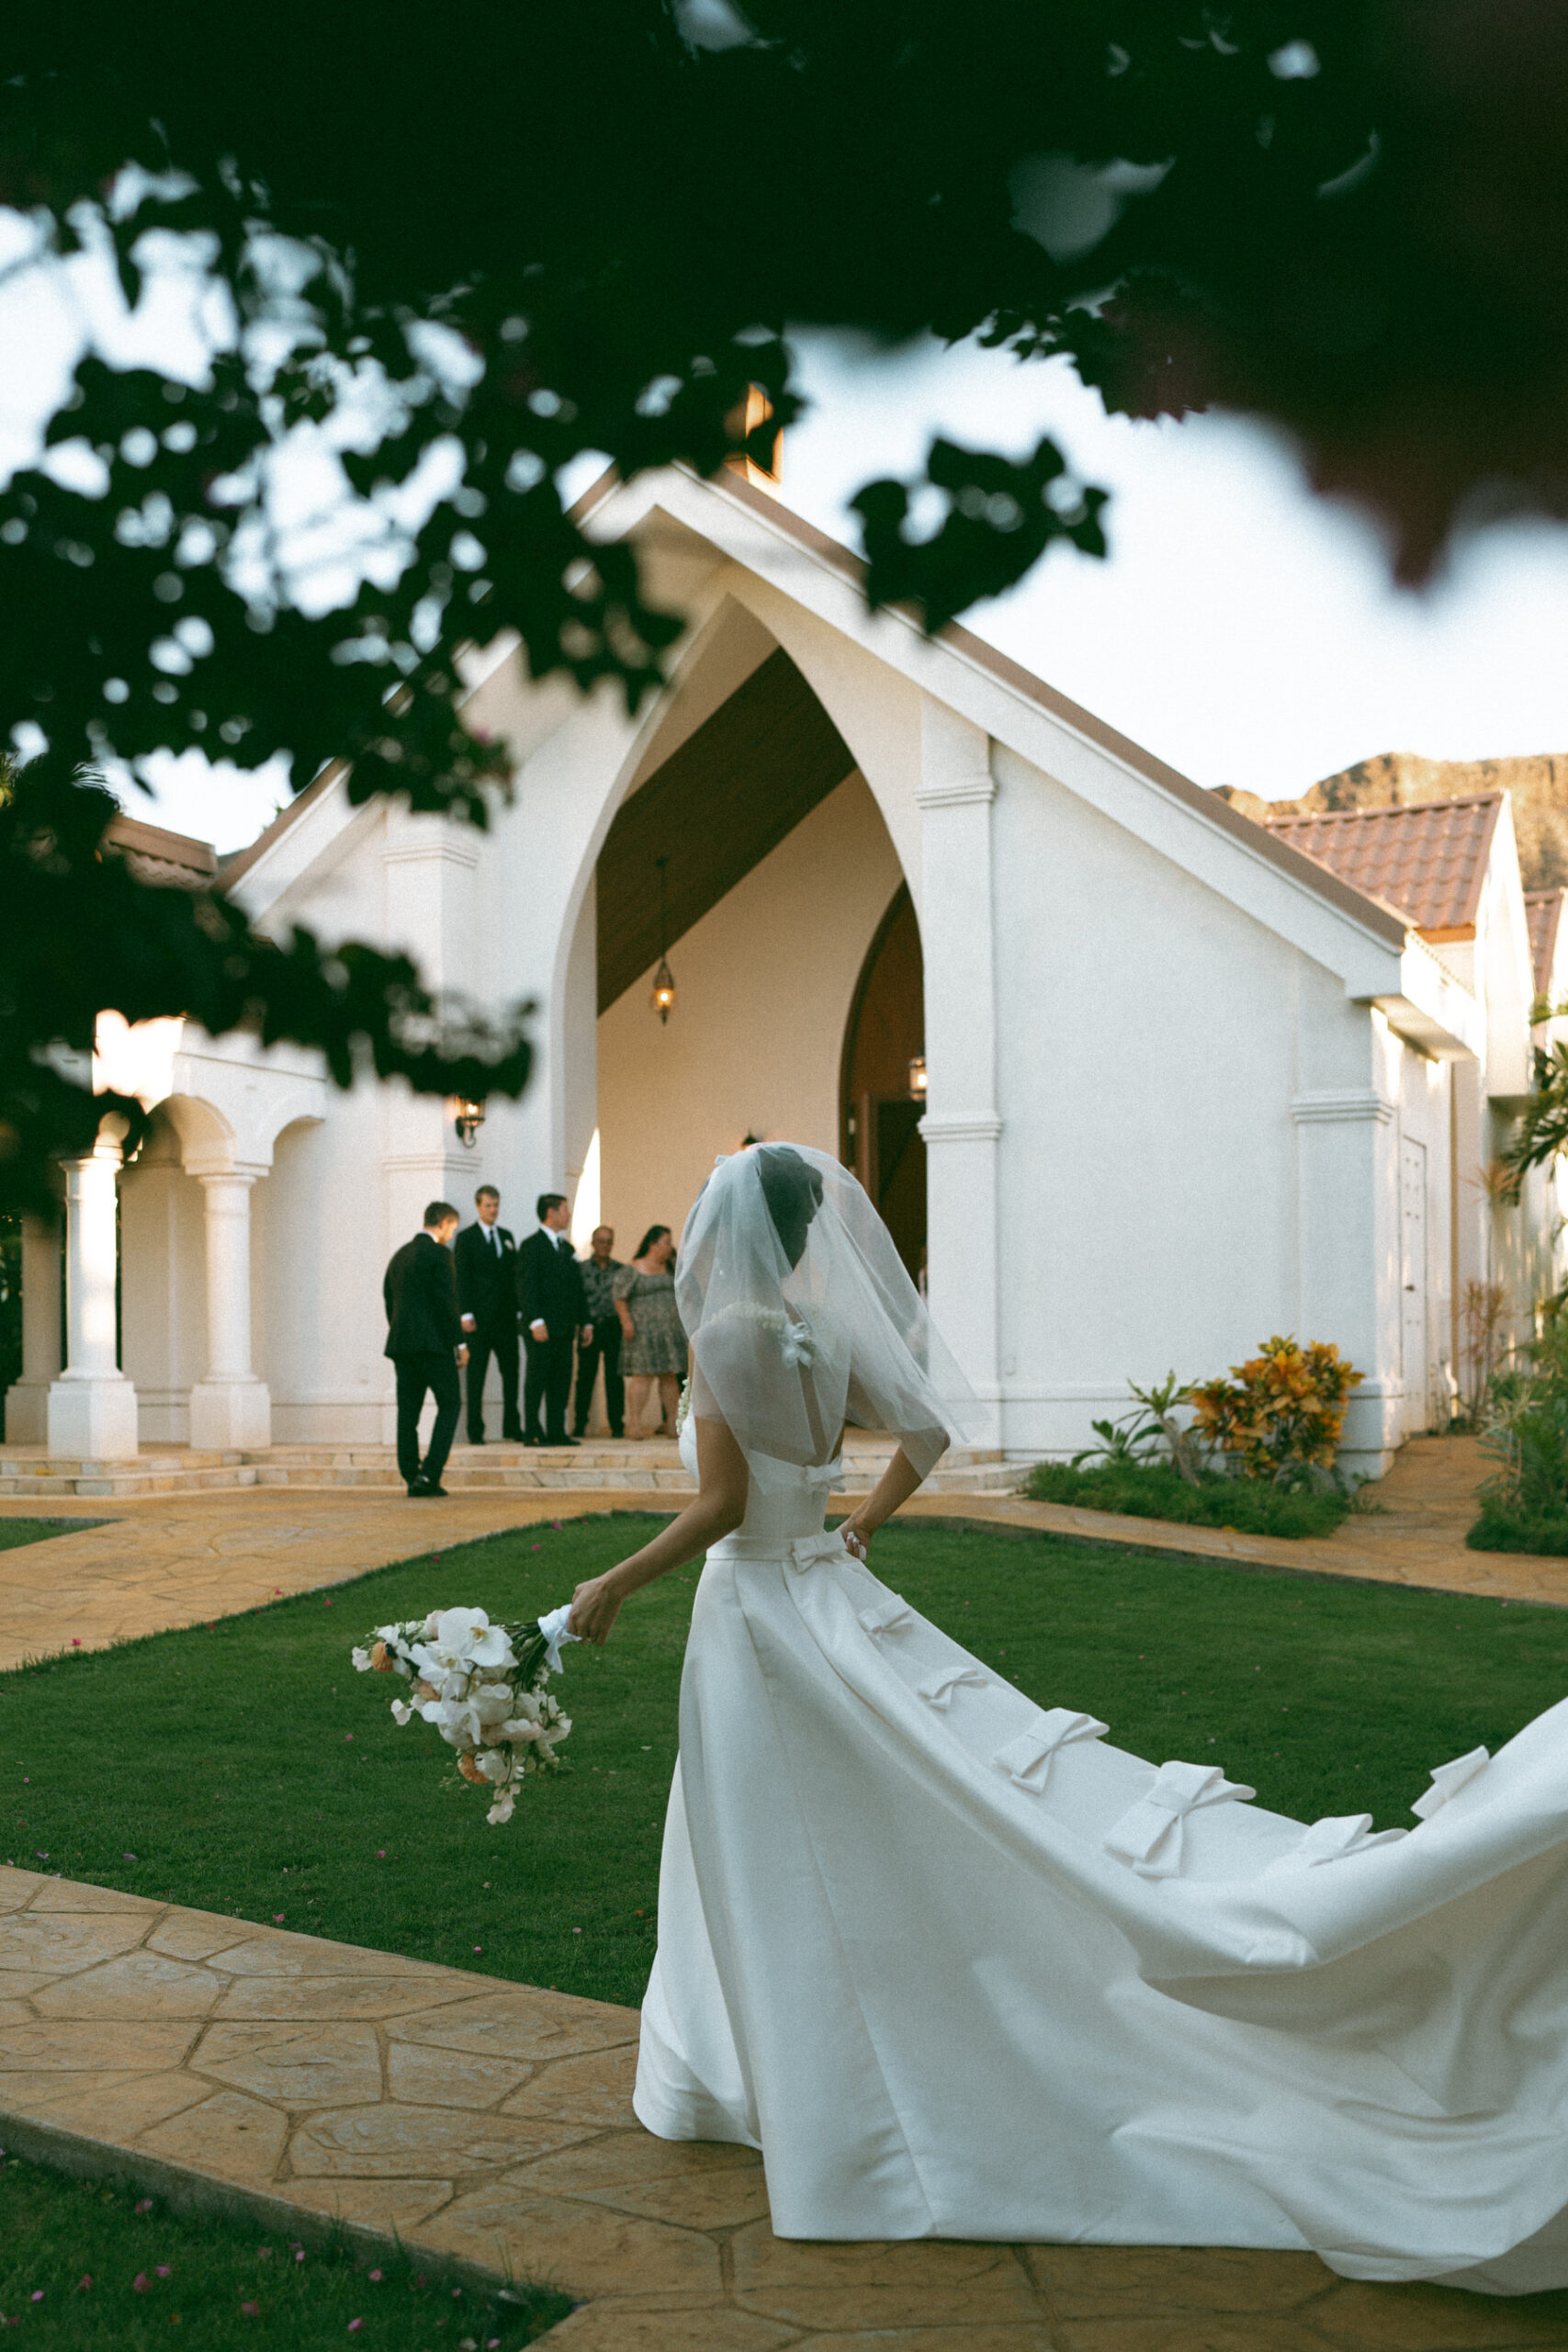 Bride immediately after wedding ceremony in front of church.